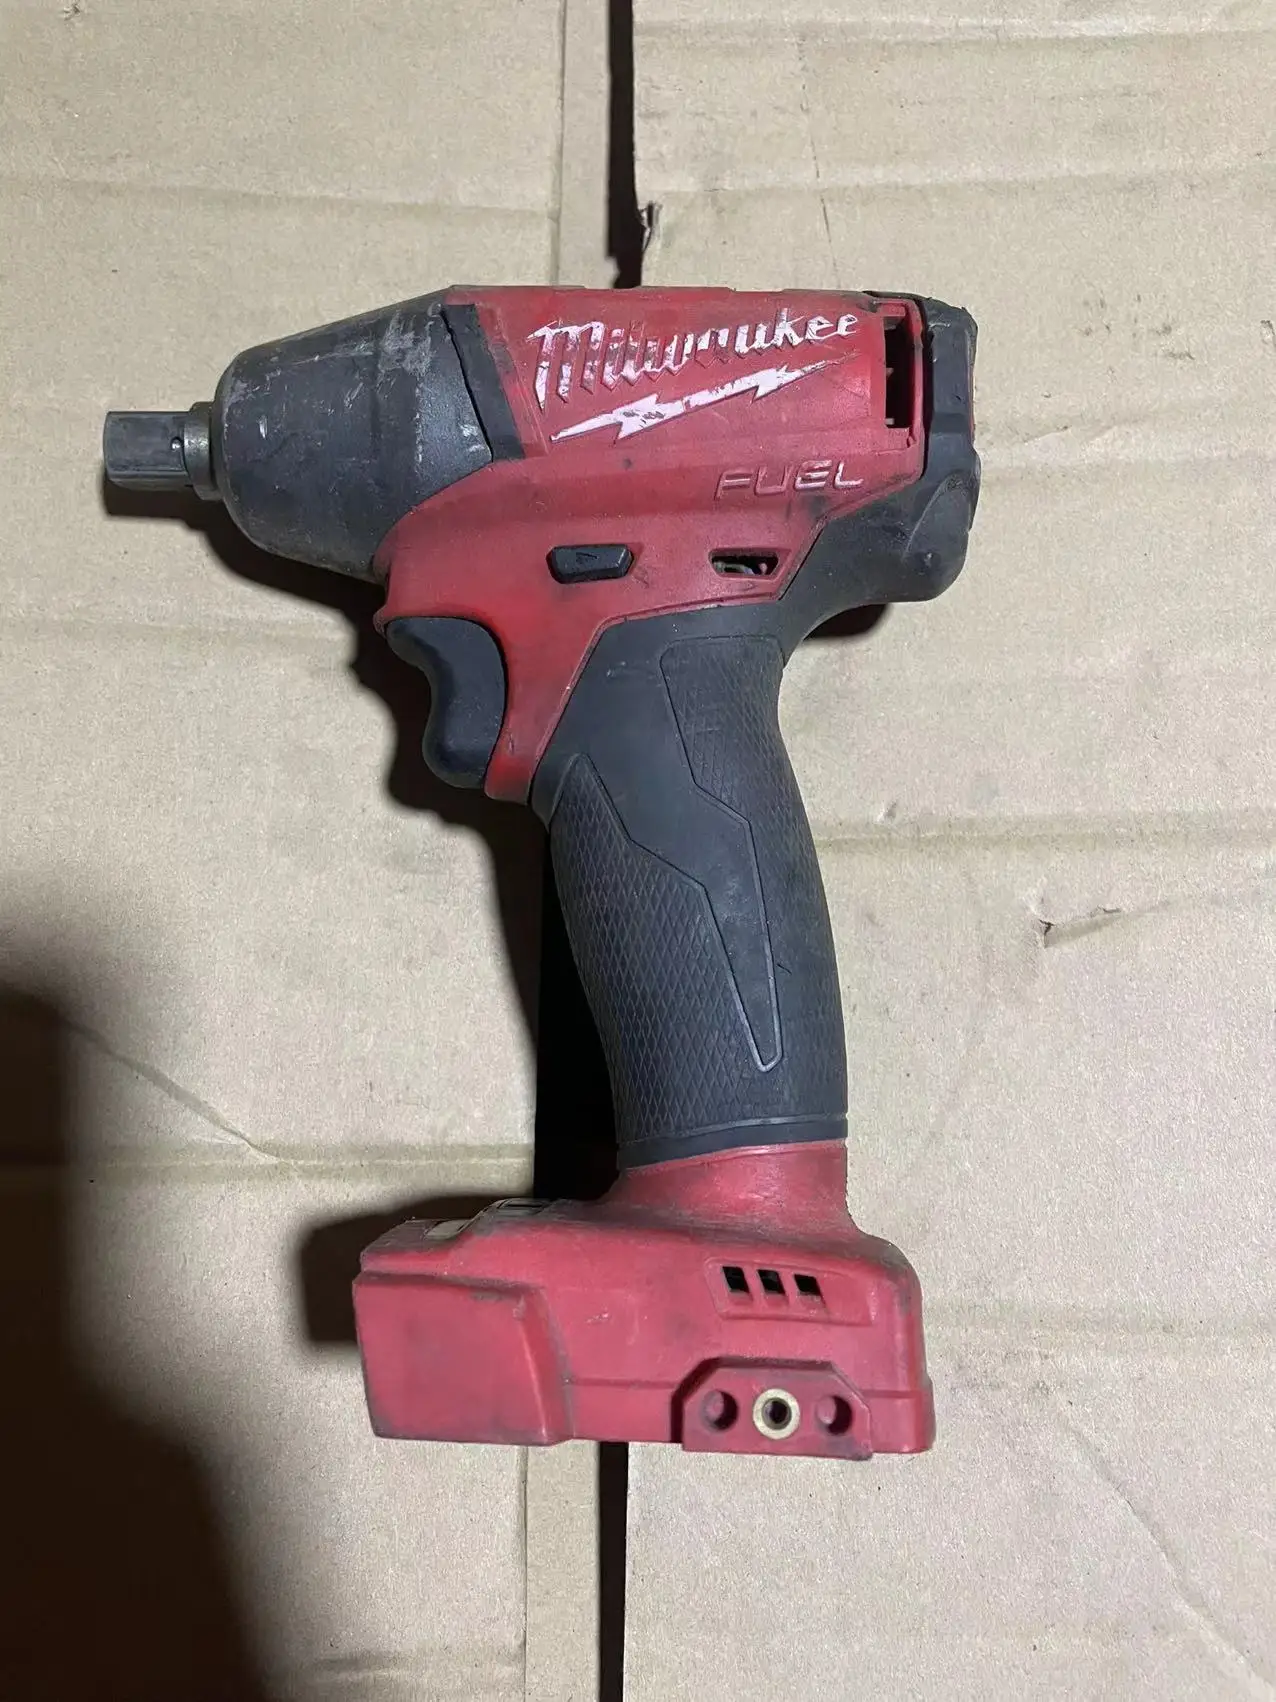 

Milwaukee 2754-20 M18 3/8" Square Ring Impact Wrench - Only one Tool，second hand